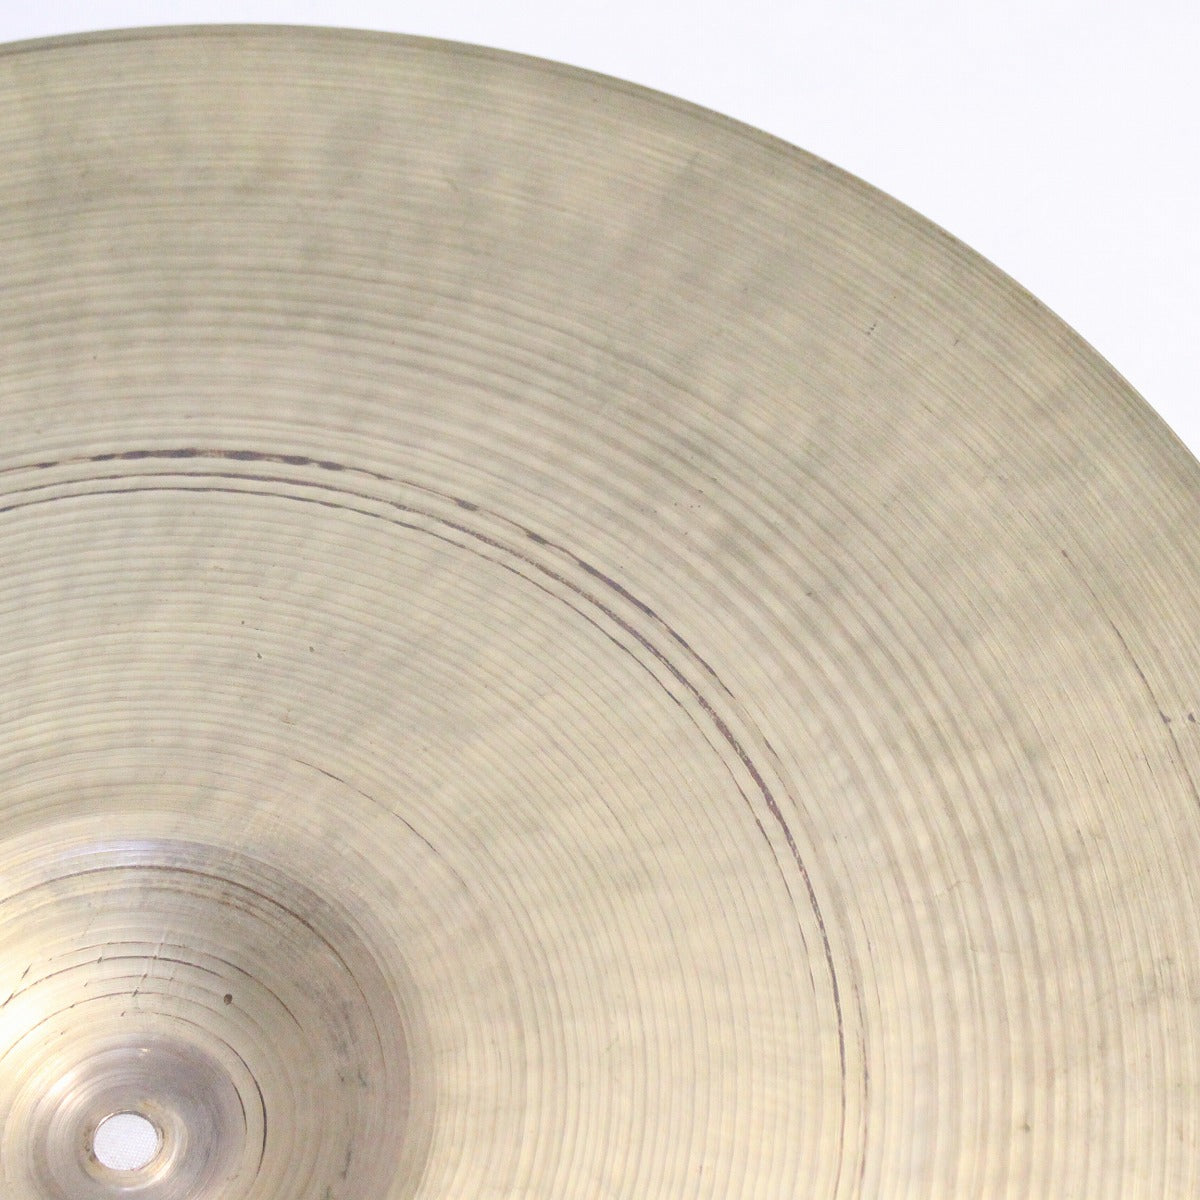 USED ZILDJIAN / Late50s A Small Stamp 20" 2288g Old A Ride Cymbal [08]